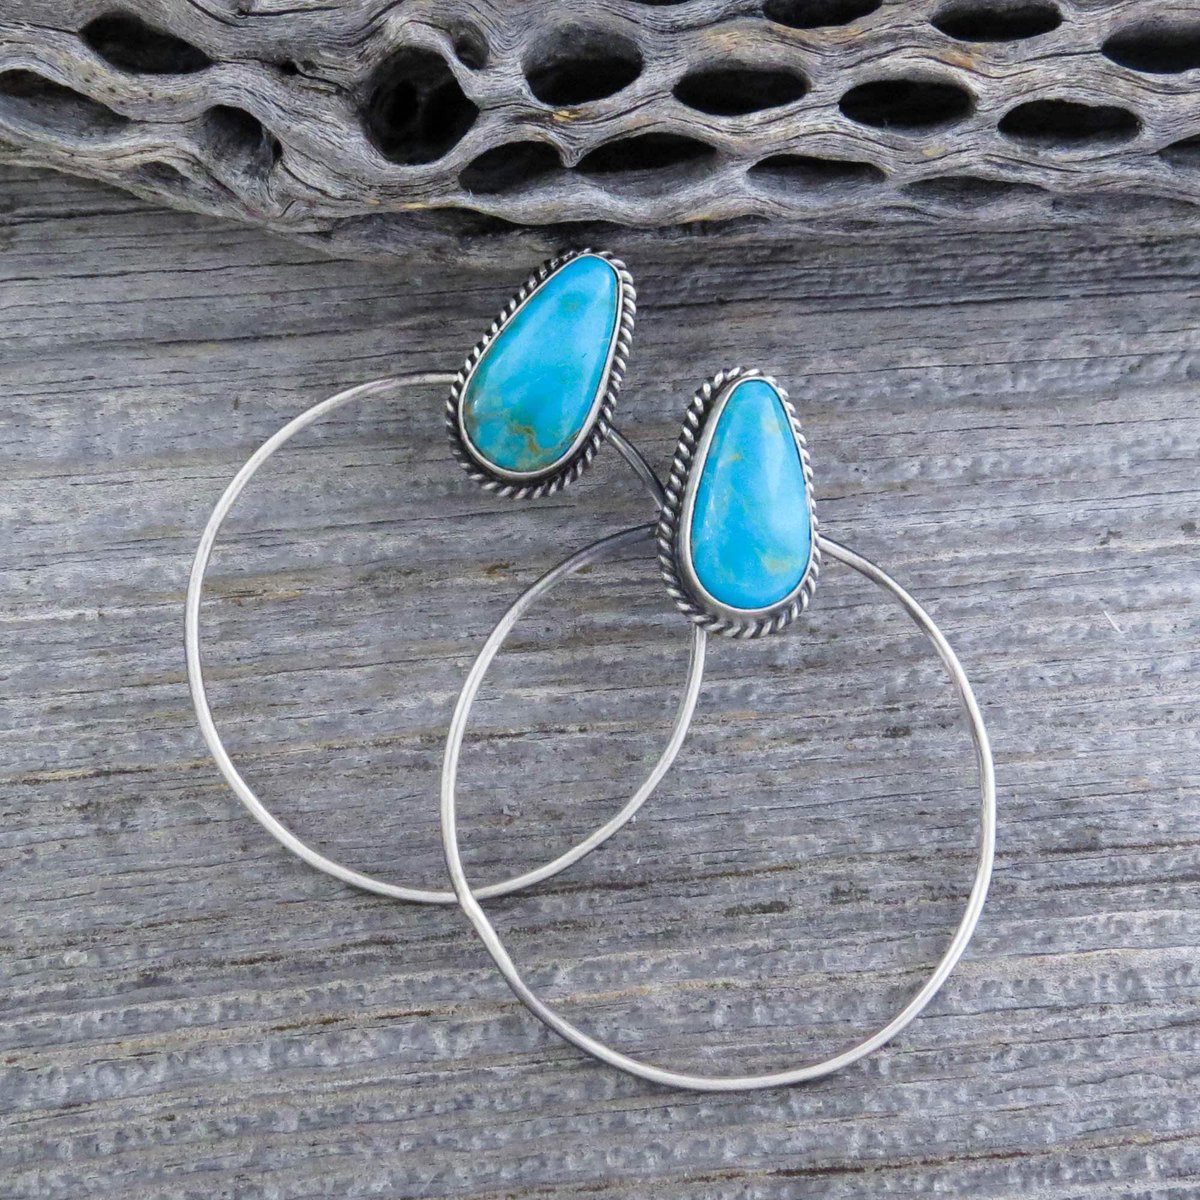 We Love Earrings!  
Save 30% when you SHOP HERE: etsy.me/3w6UDoe
#buyauthentic #turquoiseearrings #nativeamerican #bohofashion #uniqueearrings #valentinesday #blueearrings #kokopellitraders #hoops #turquoisejewelry #statementearring